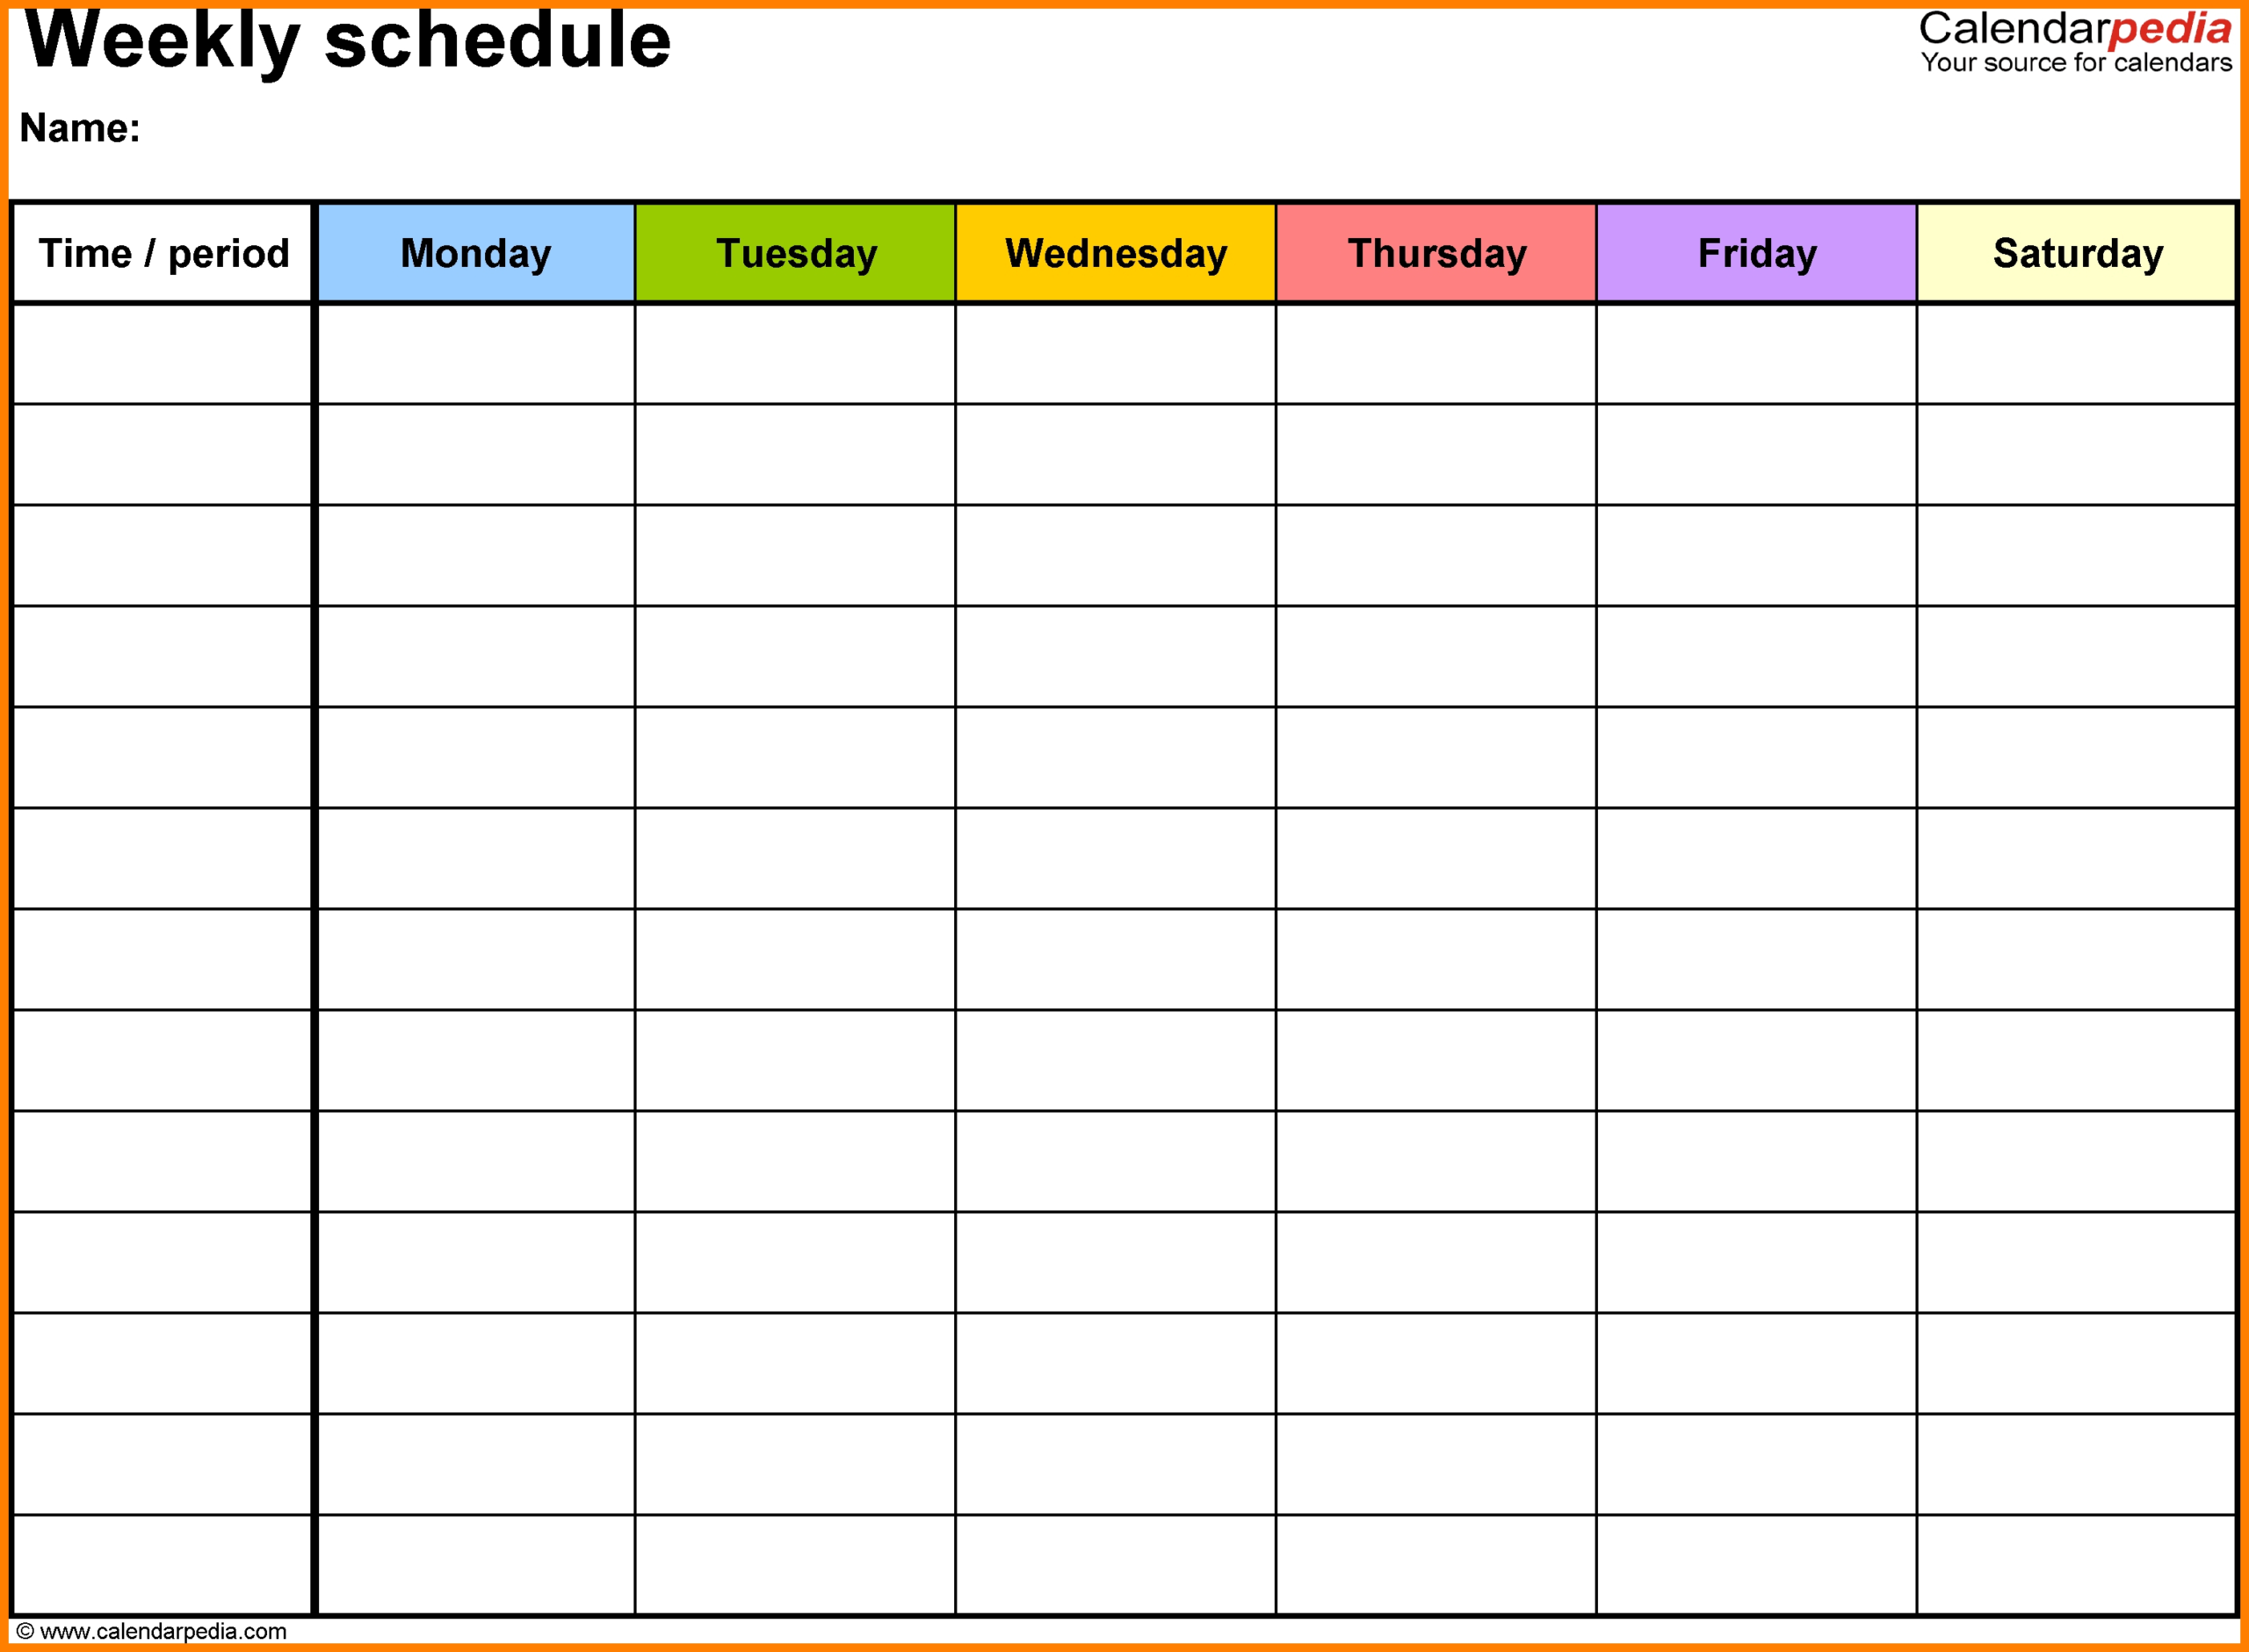 Printable Schedule With Time Slots | Example Calendar